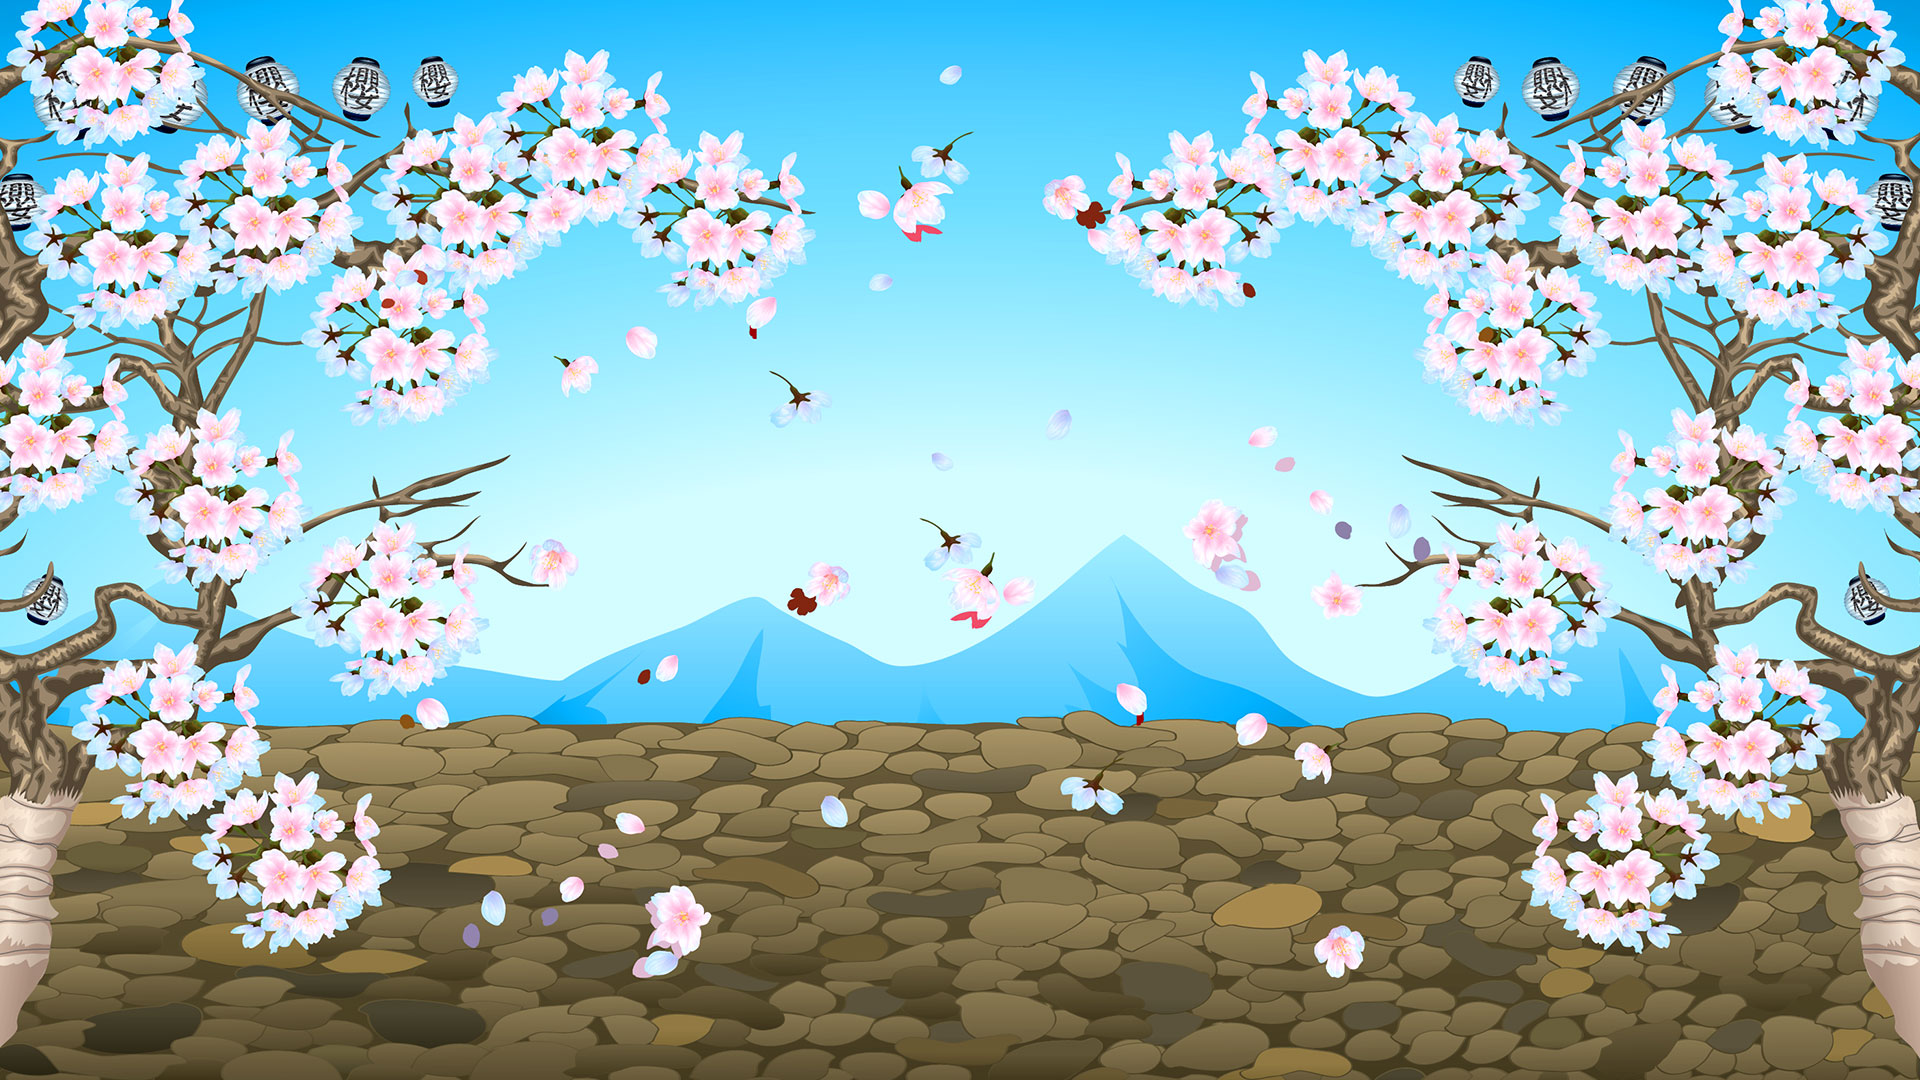 Game hight resolution background Cherry Blossoms